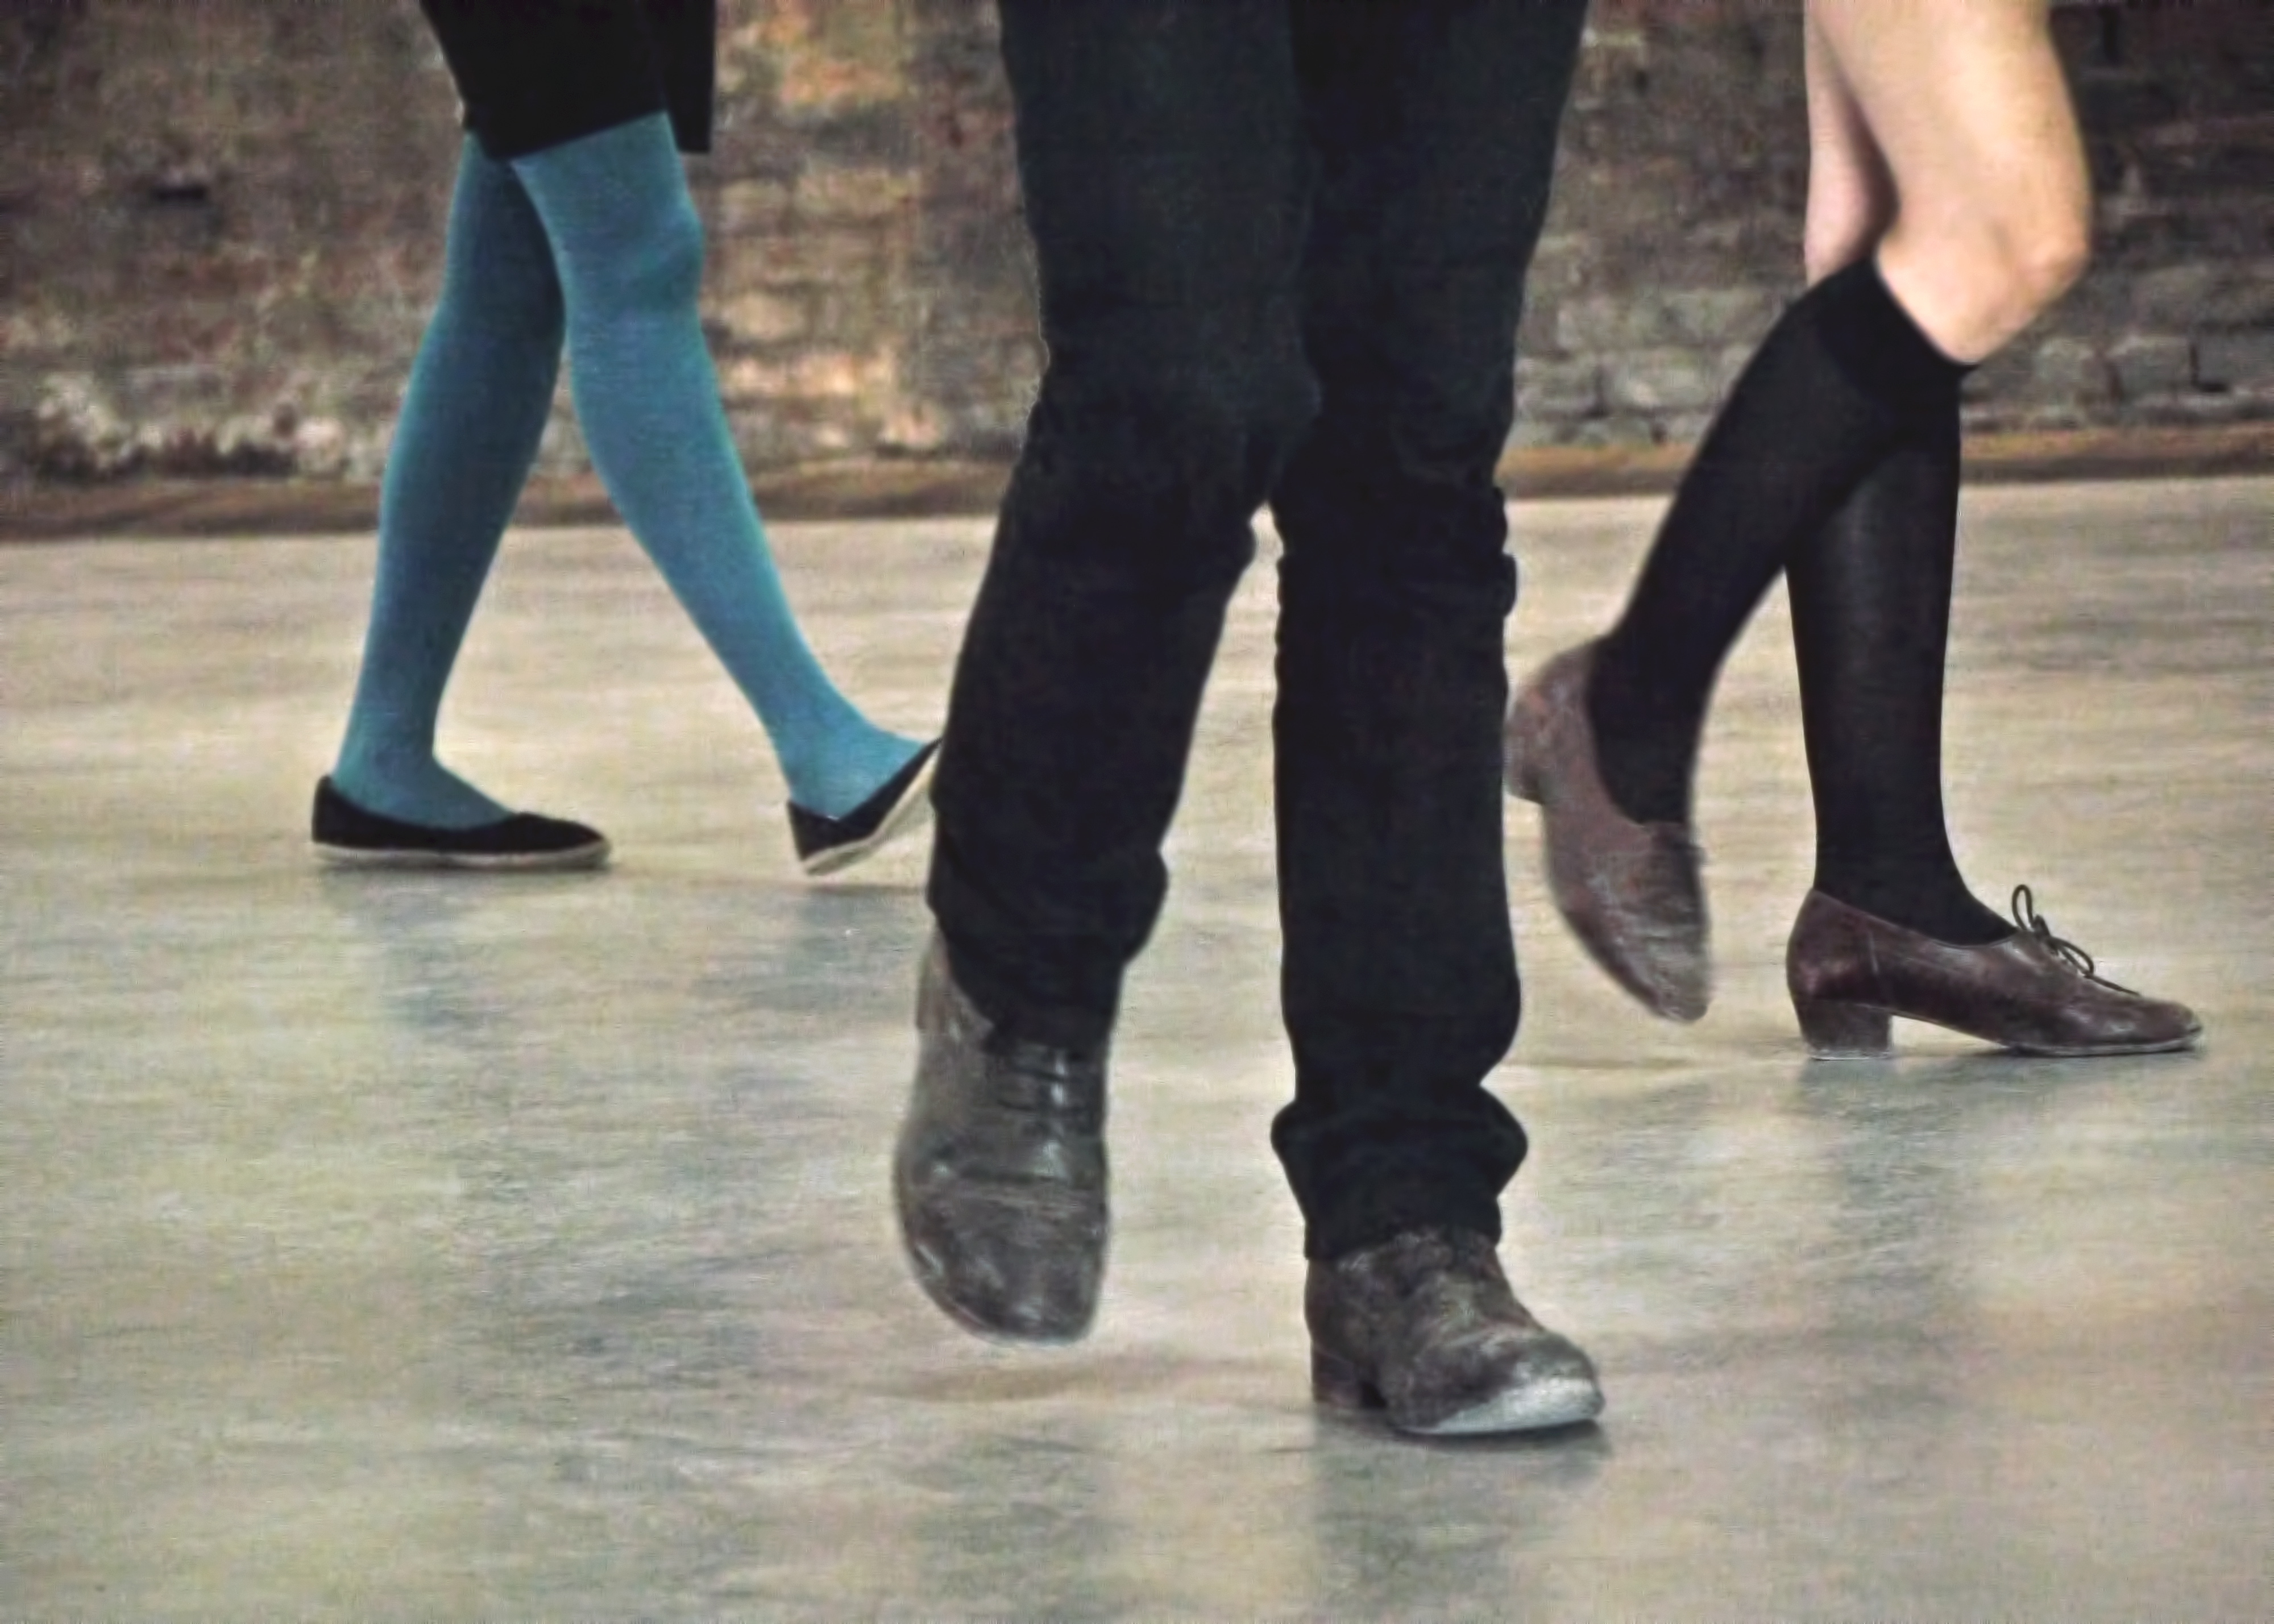 photograph of three pairs of legs walking on a street particularly one with long blue tights